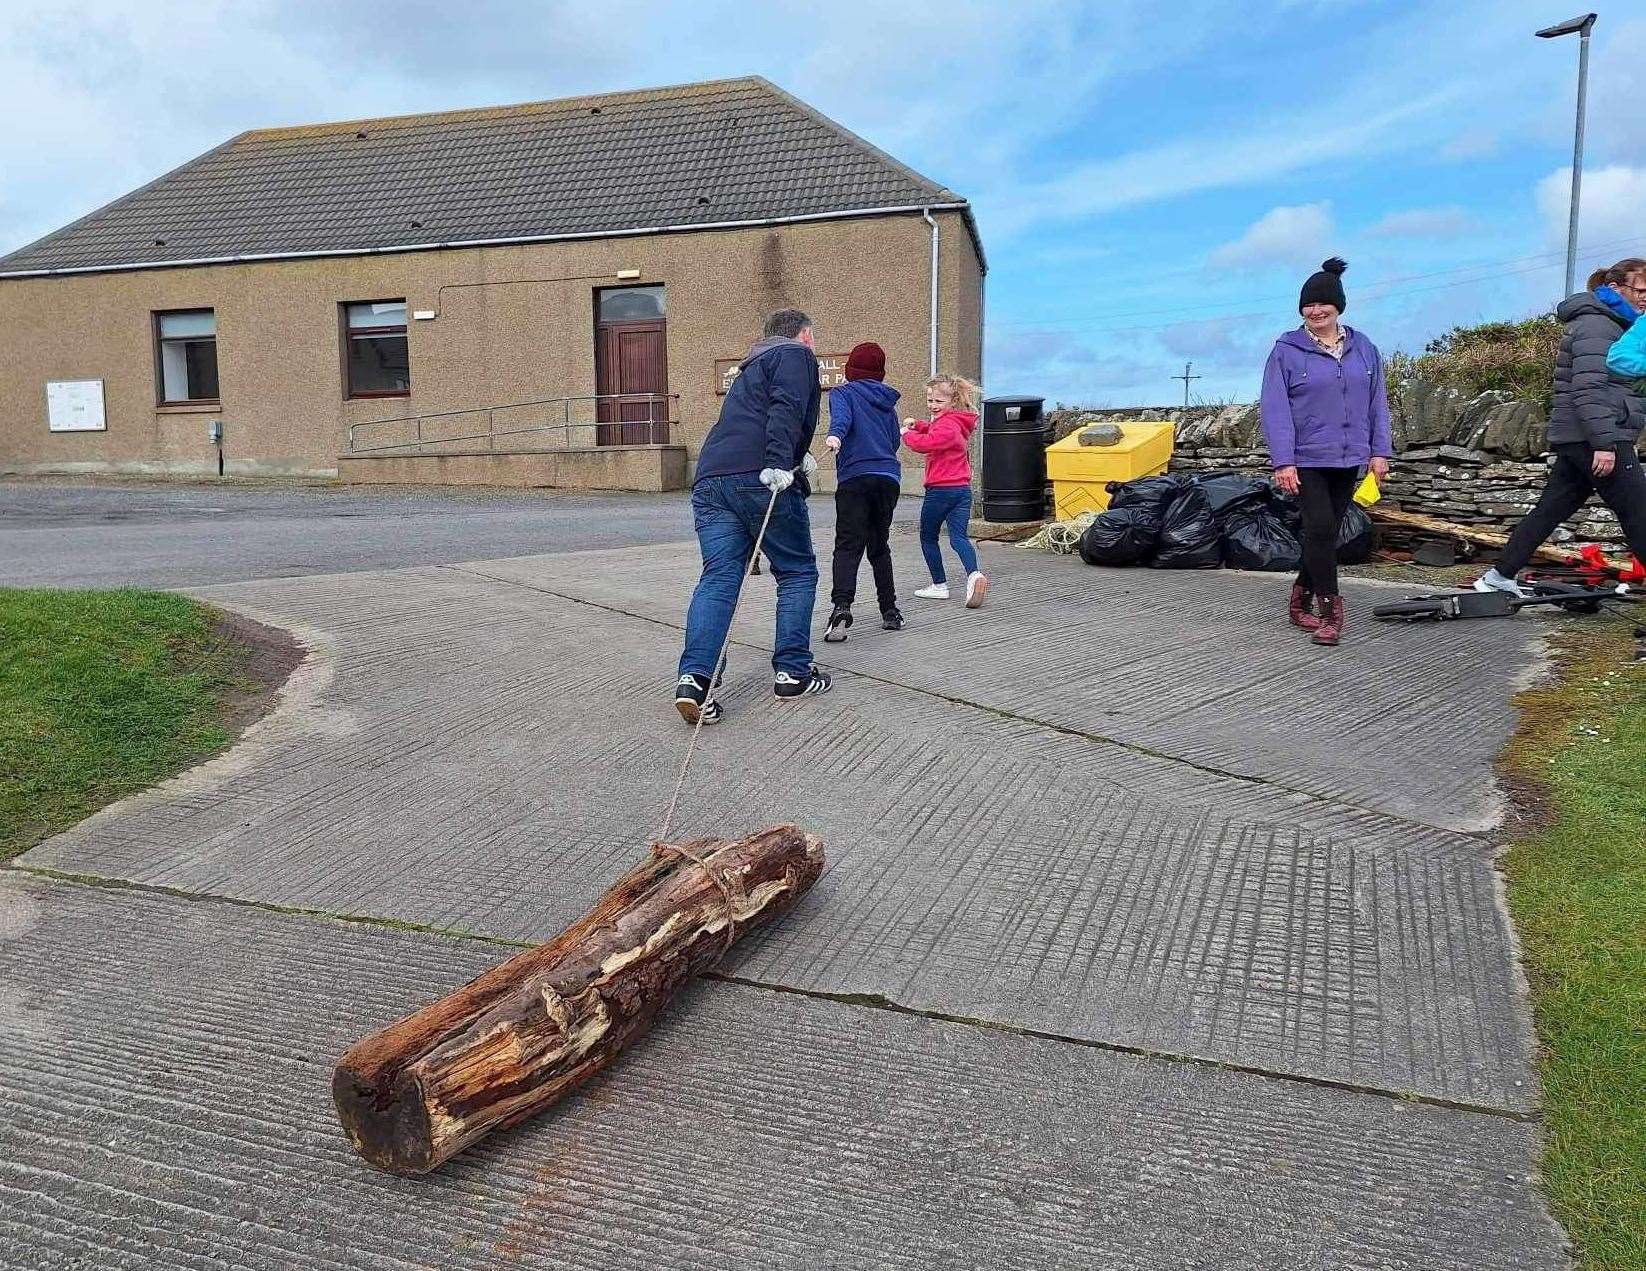 A team effort to haul a heavy log up from the harbour.